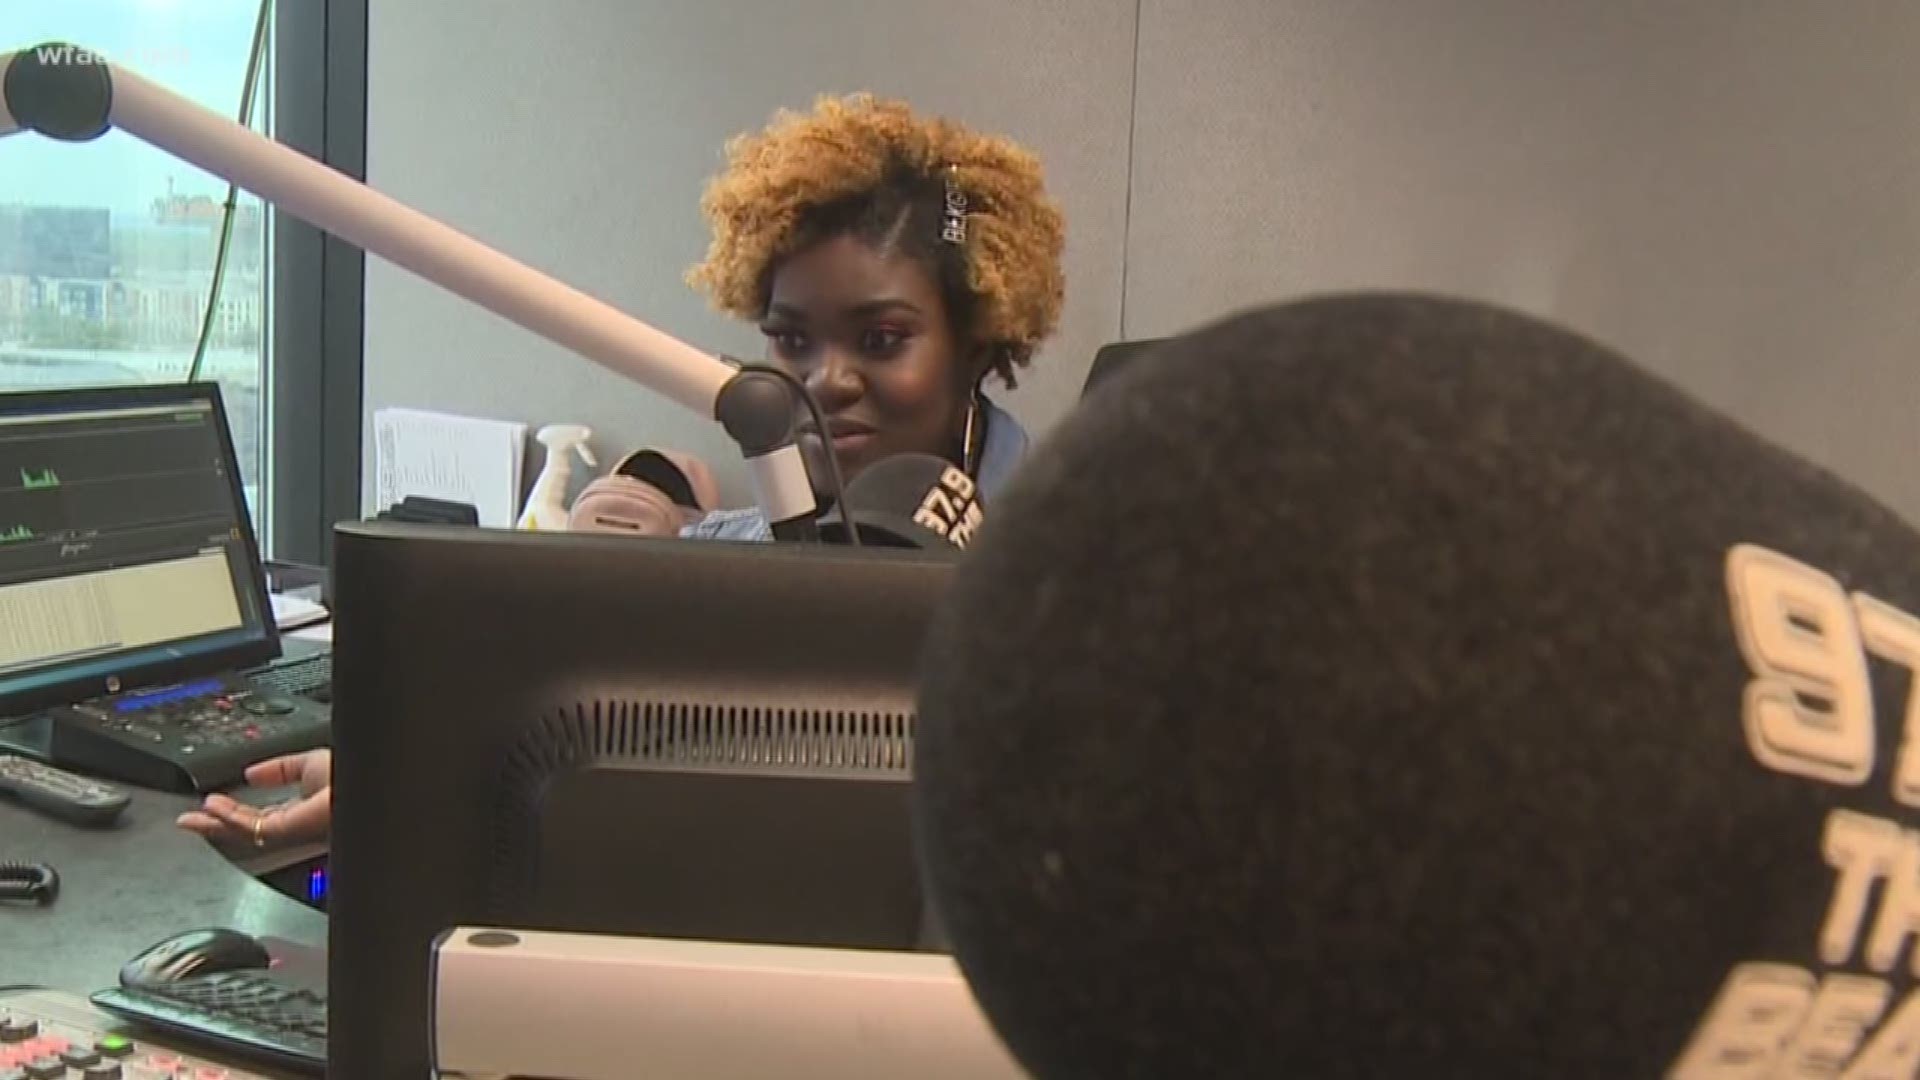 Eight years ago Dee Porter was working part time in Ohio and living out of her car. Now she has her dream job as a radio host in Dallas.